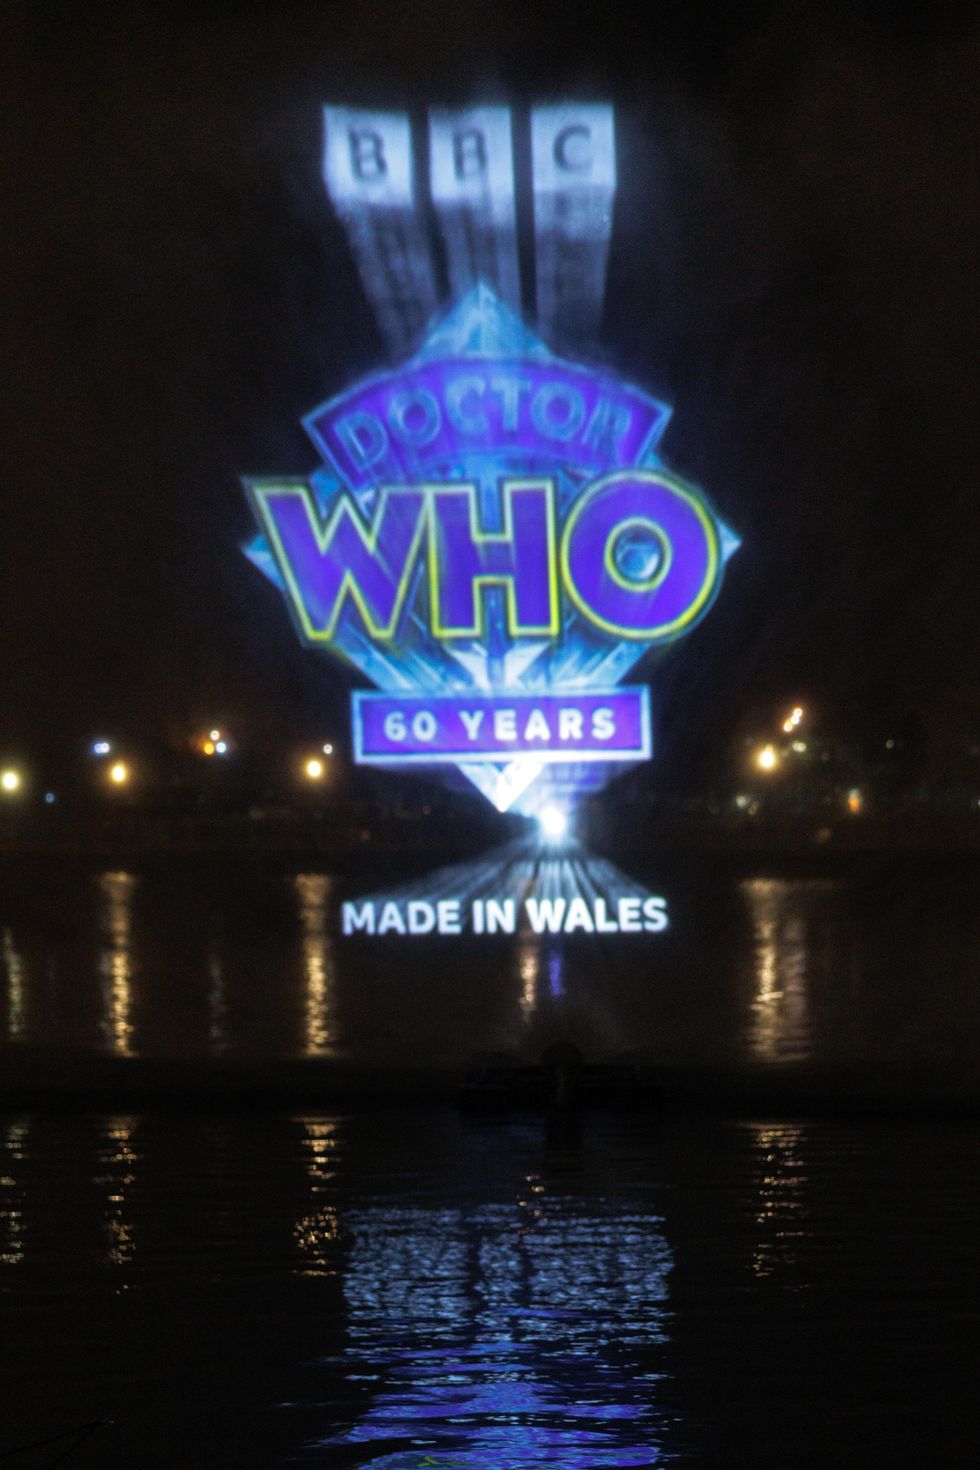 Sixty years of Doctor Who celebrated with water-based projection in Cardiff